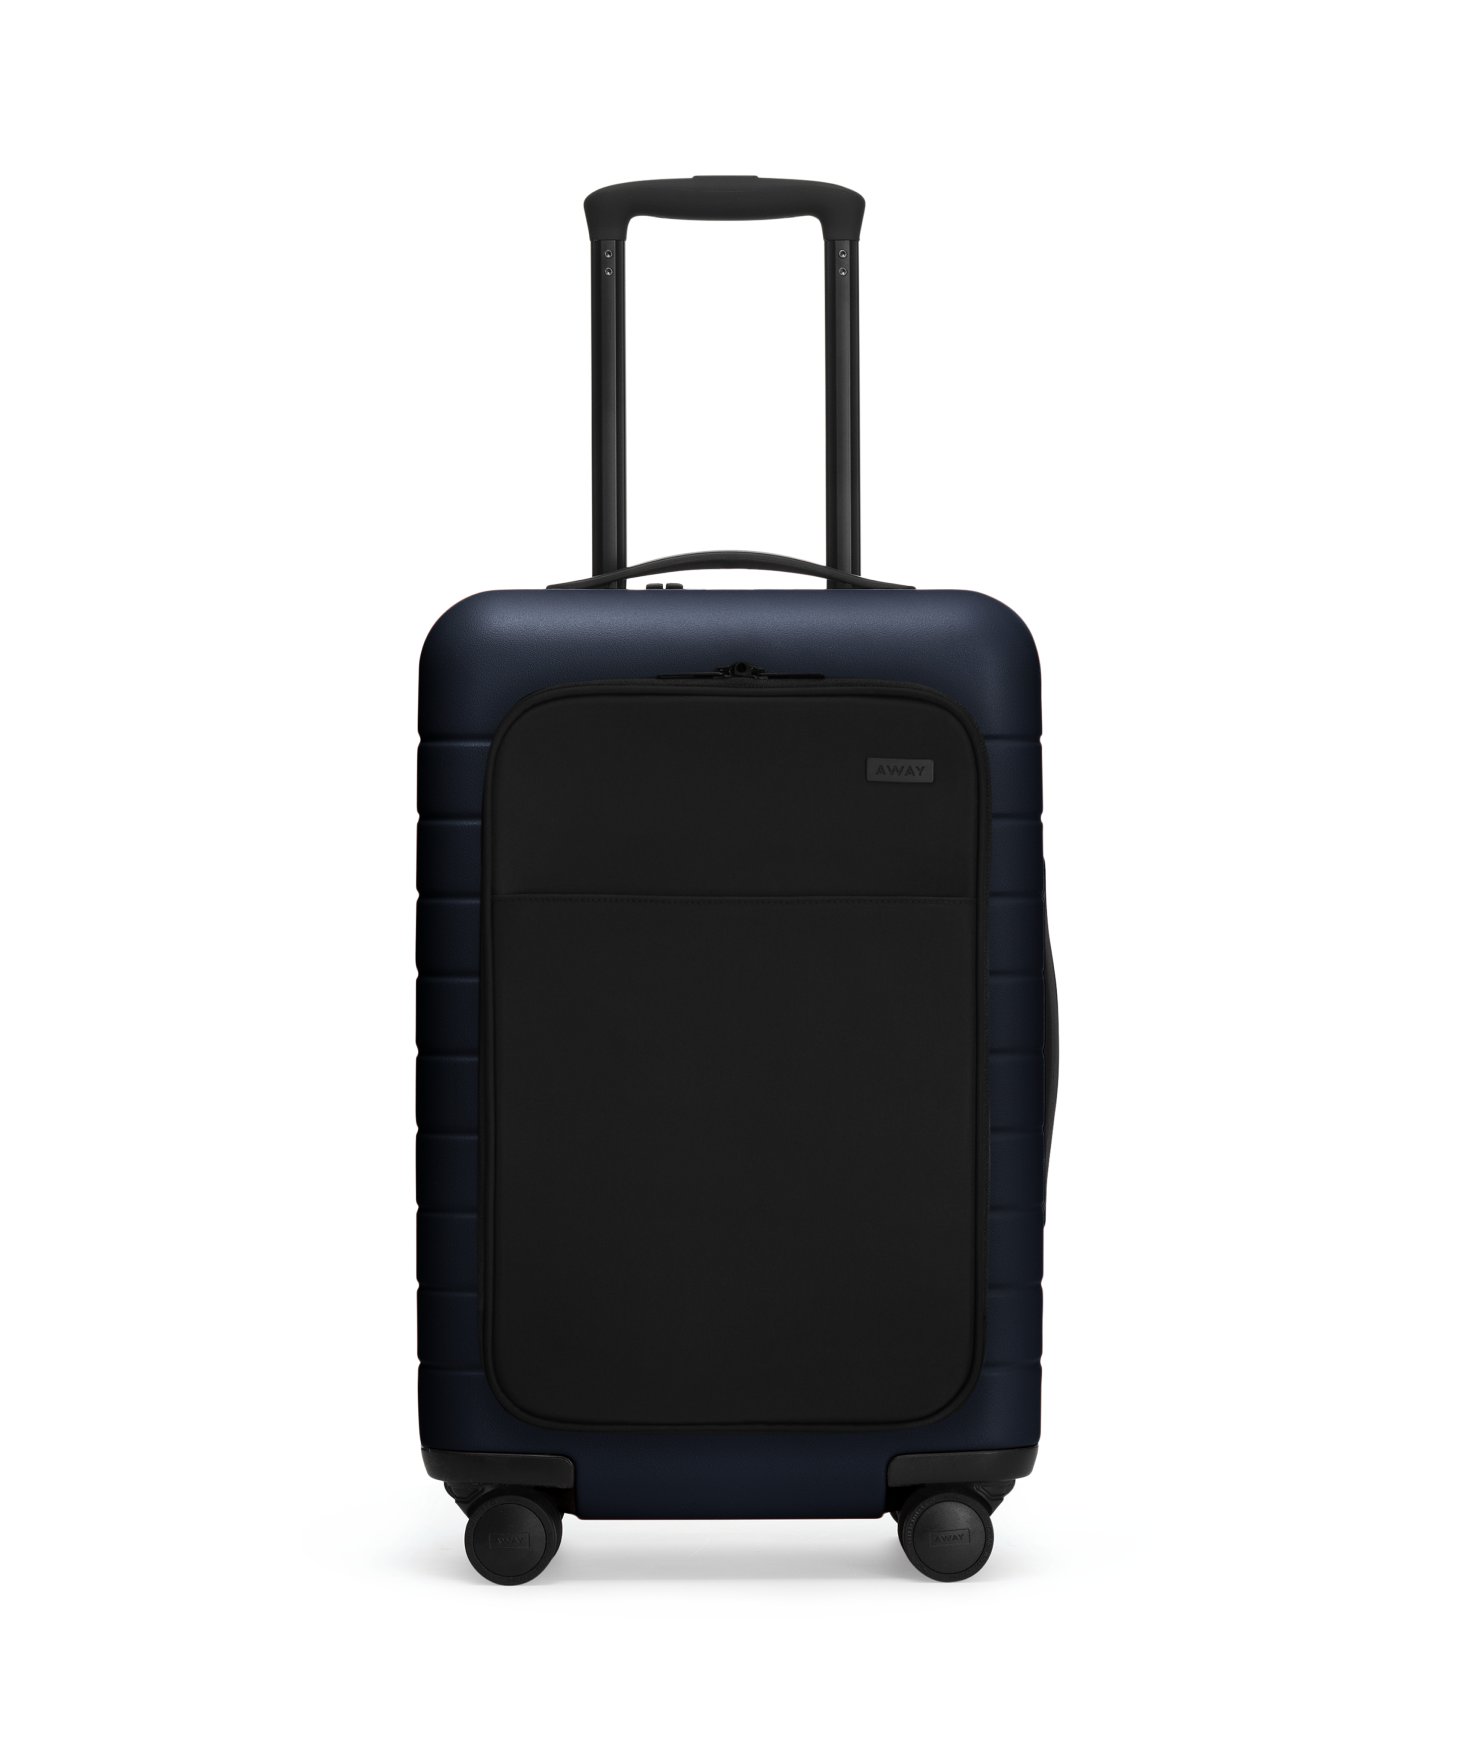 The Carry-On with Pocket